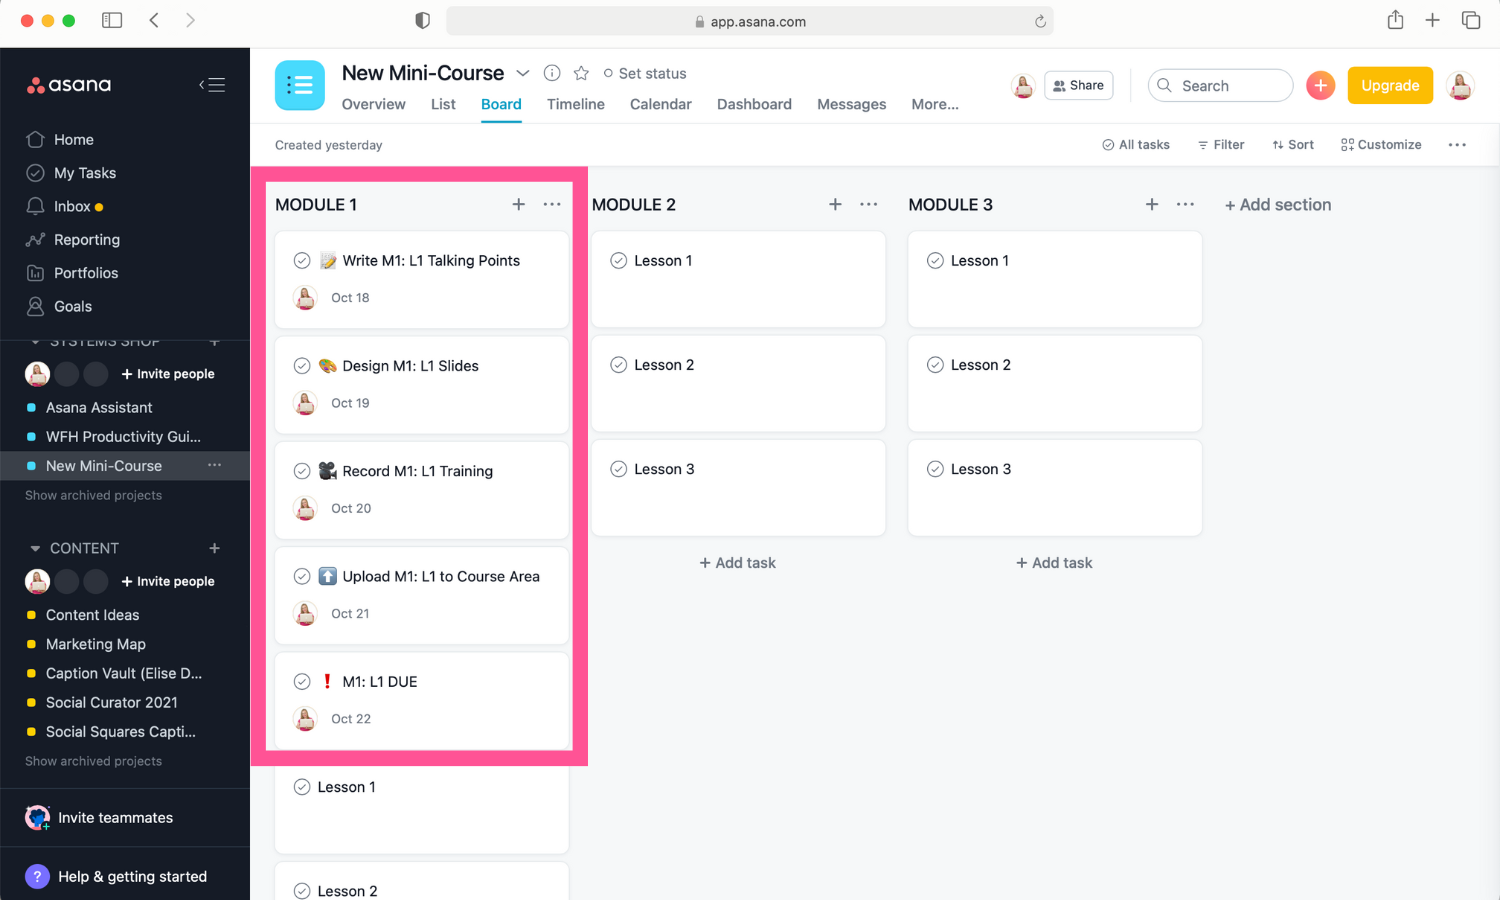 Screenshot of to-do cards with Due/Do Dates in Asana board view.